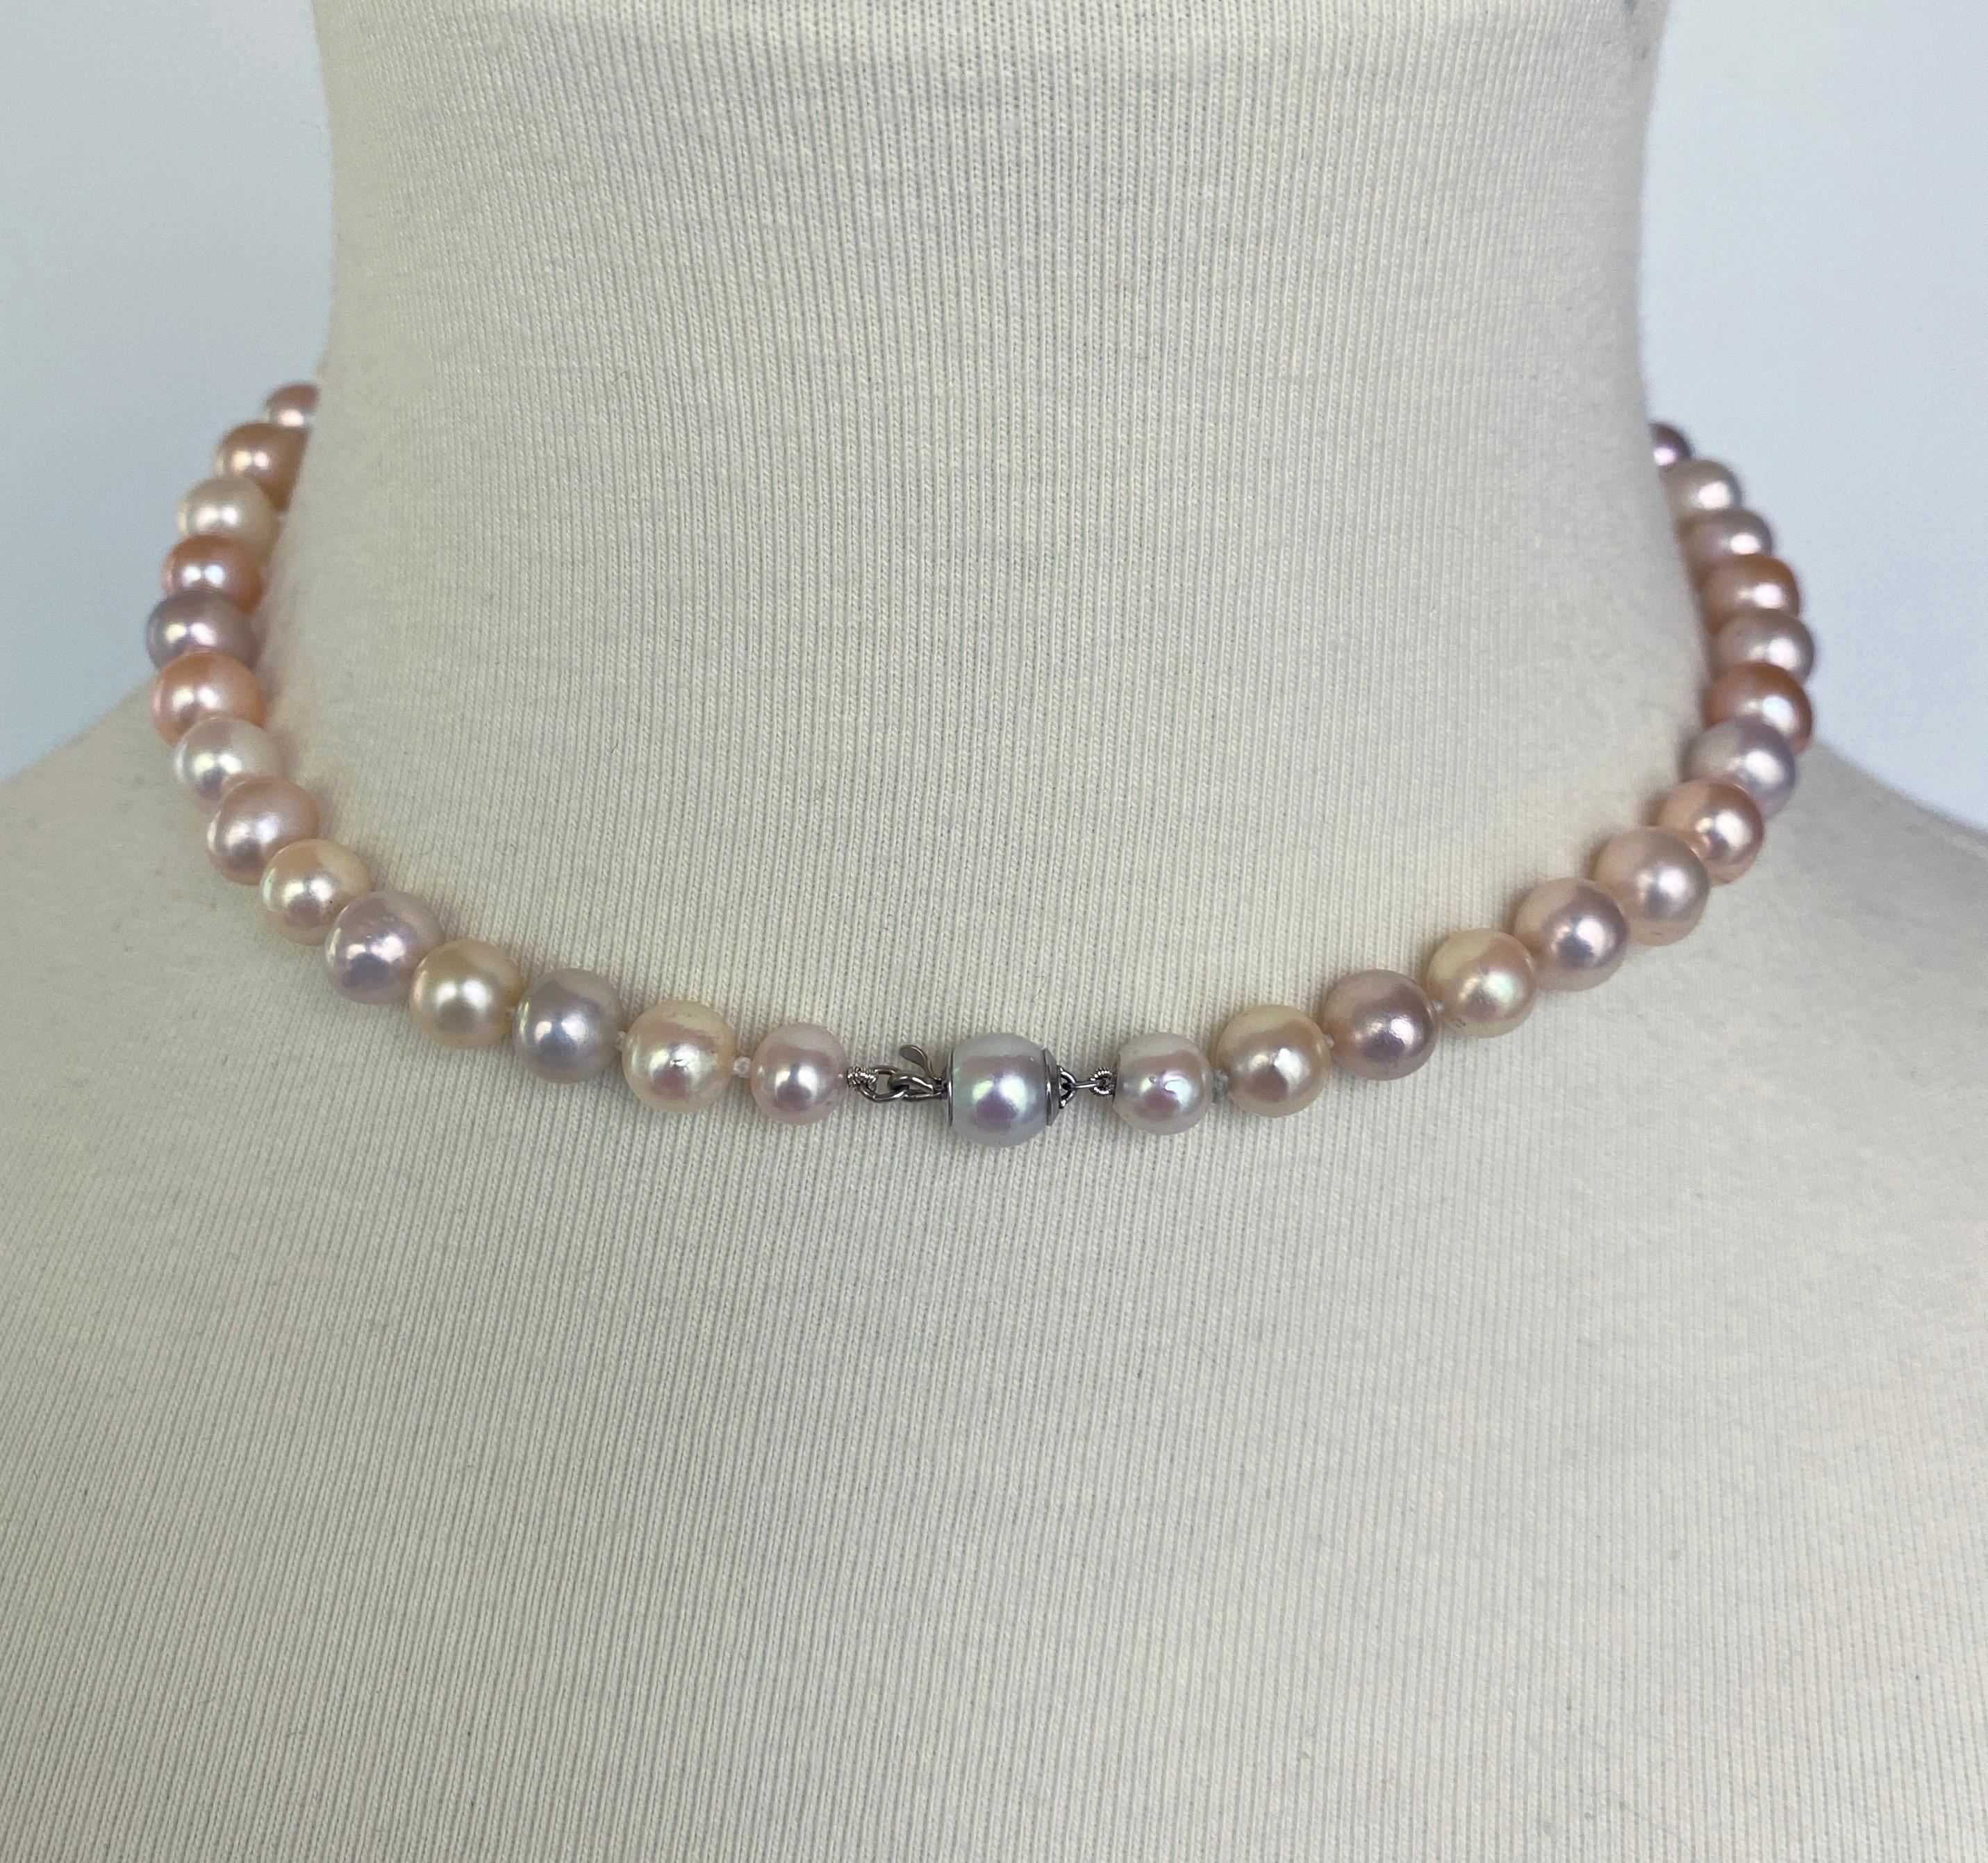 Artisan Marina J. Multi Colored Pearl Necklace with 14k White Gold Clasp For Sale